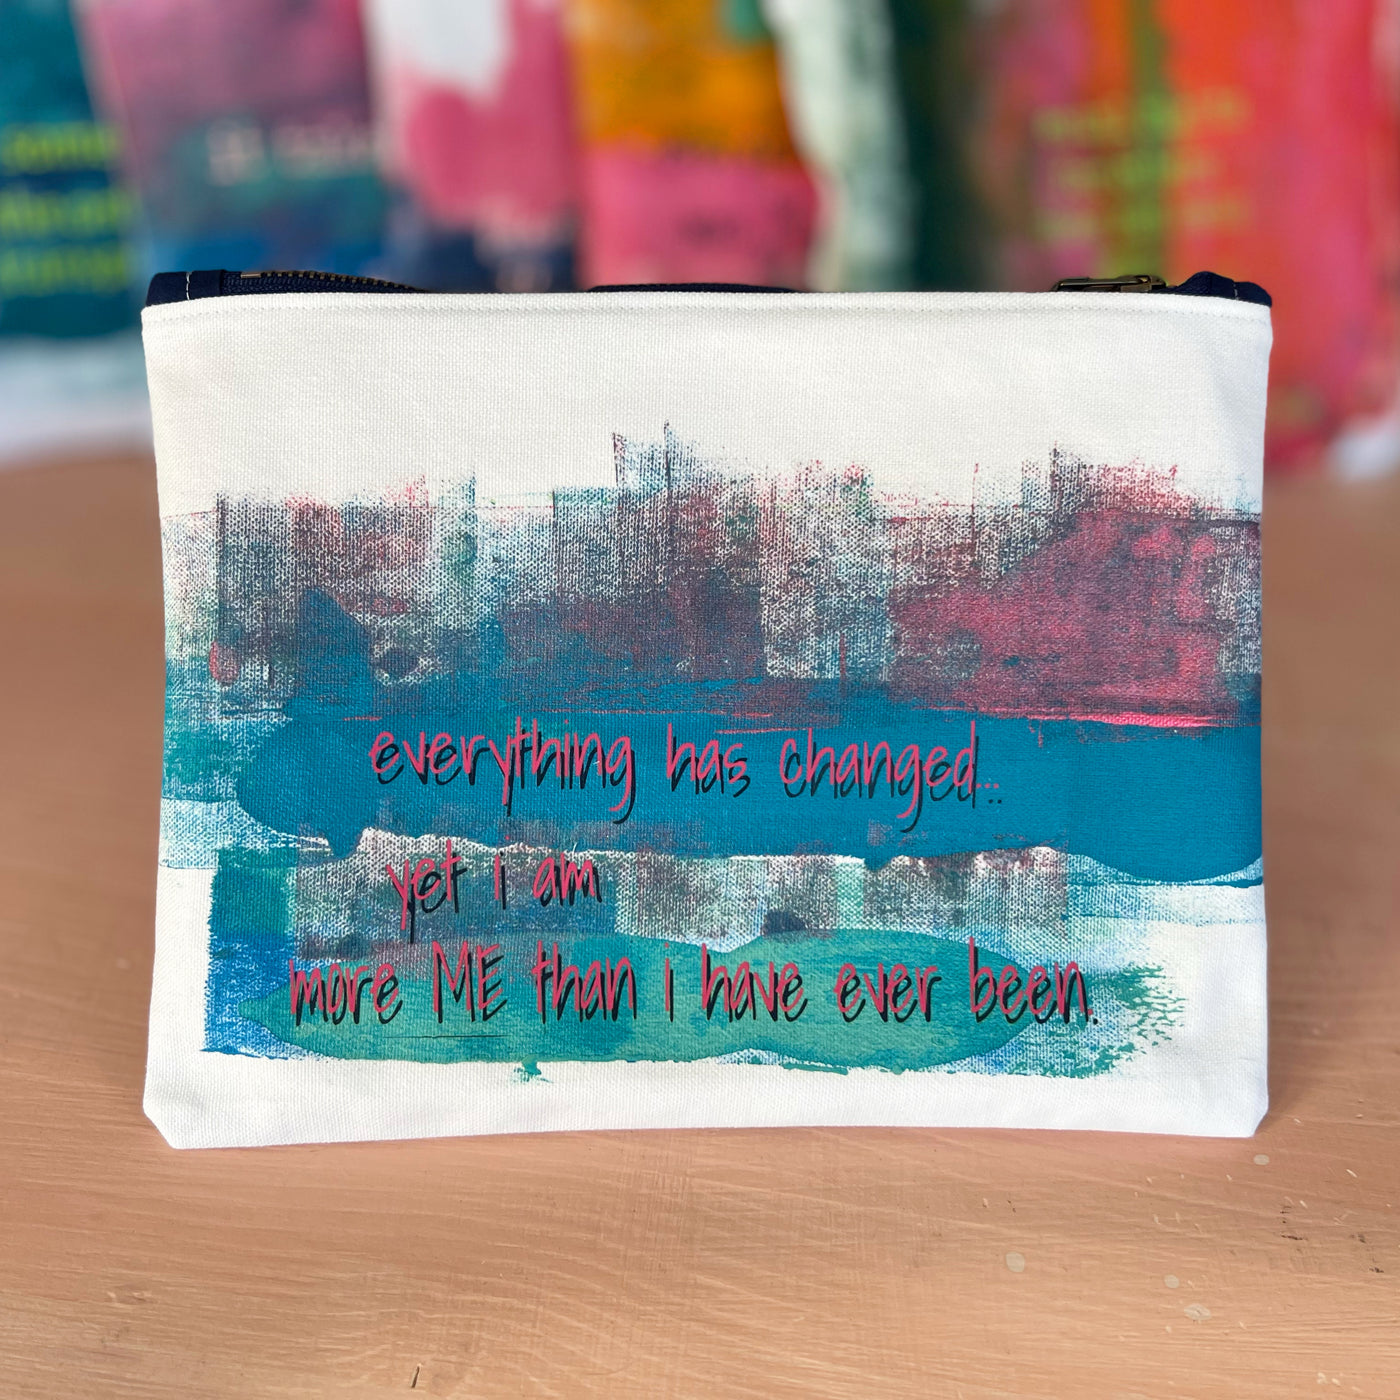 everything has changed, yet i am more me - canvas art zip bag